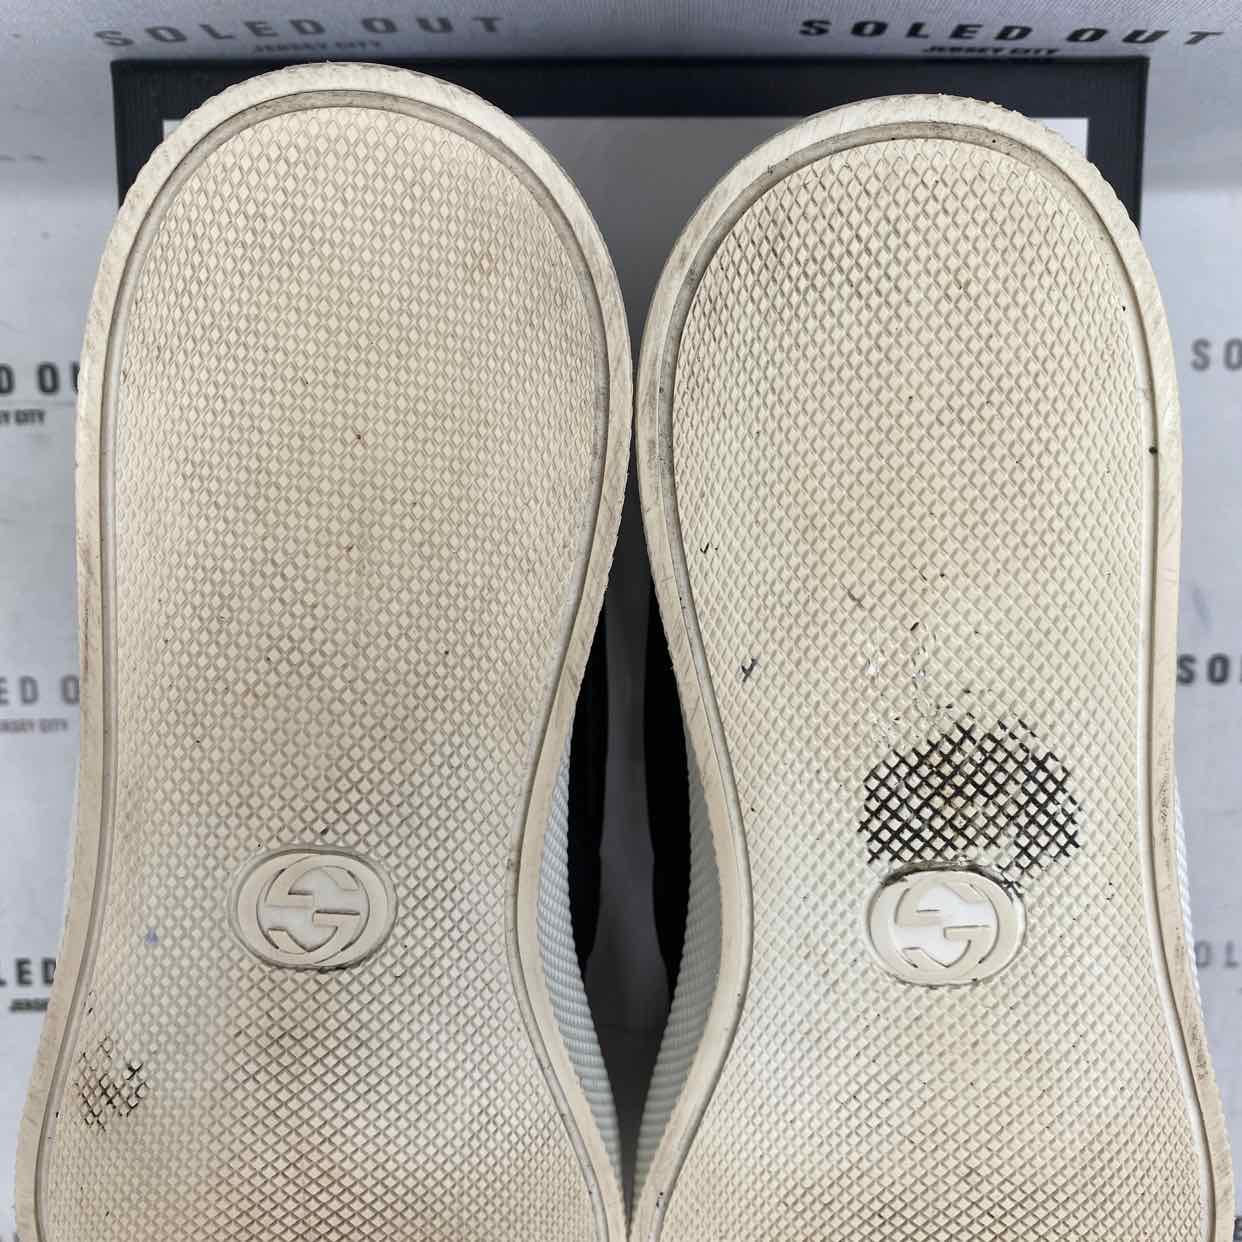 Gucci Slip-on "Worldwide"  Used Size 8G